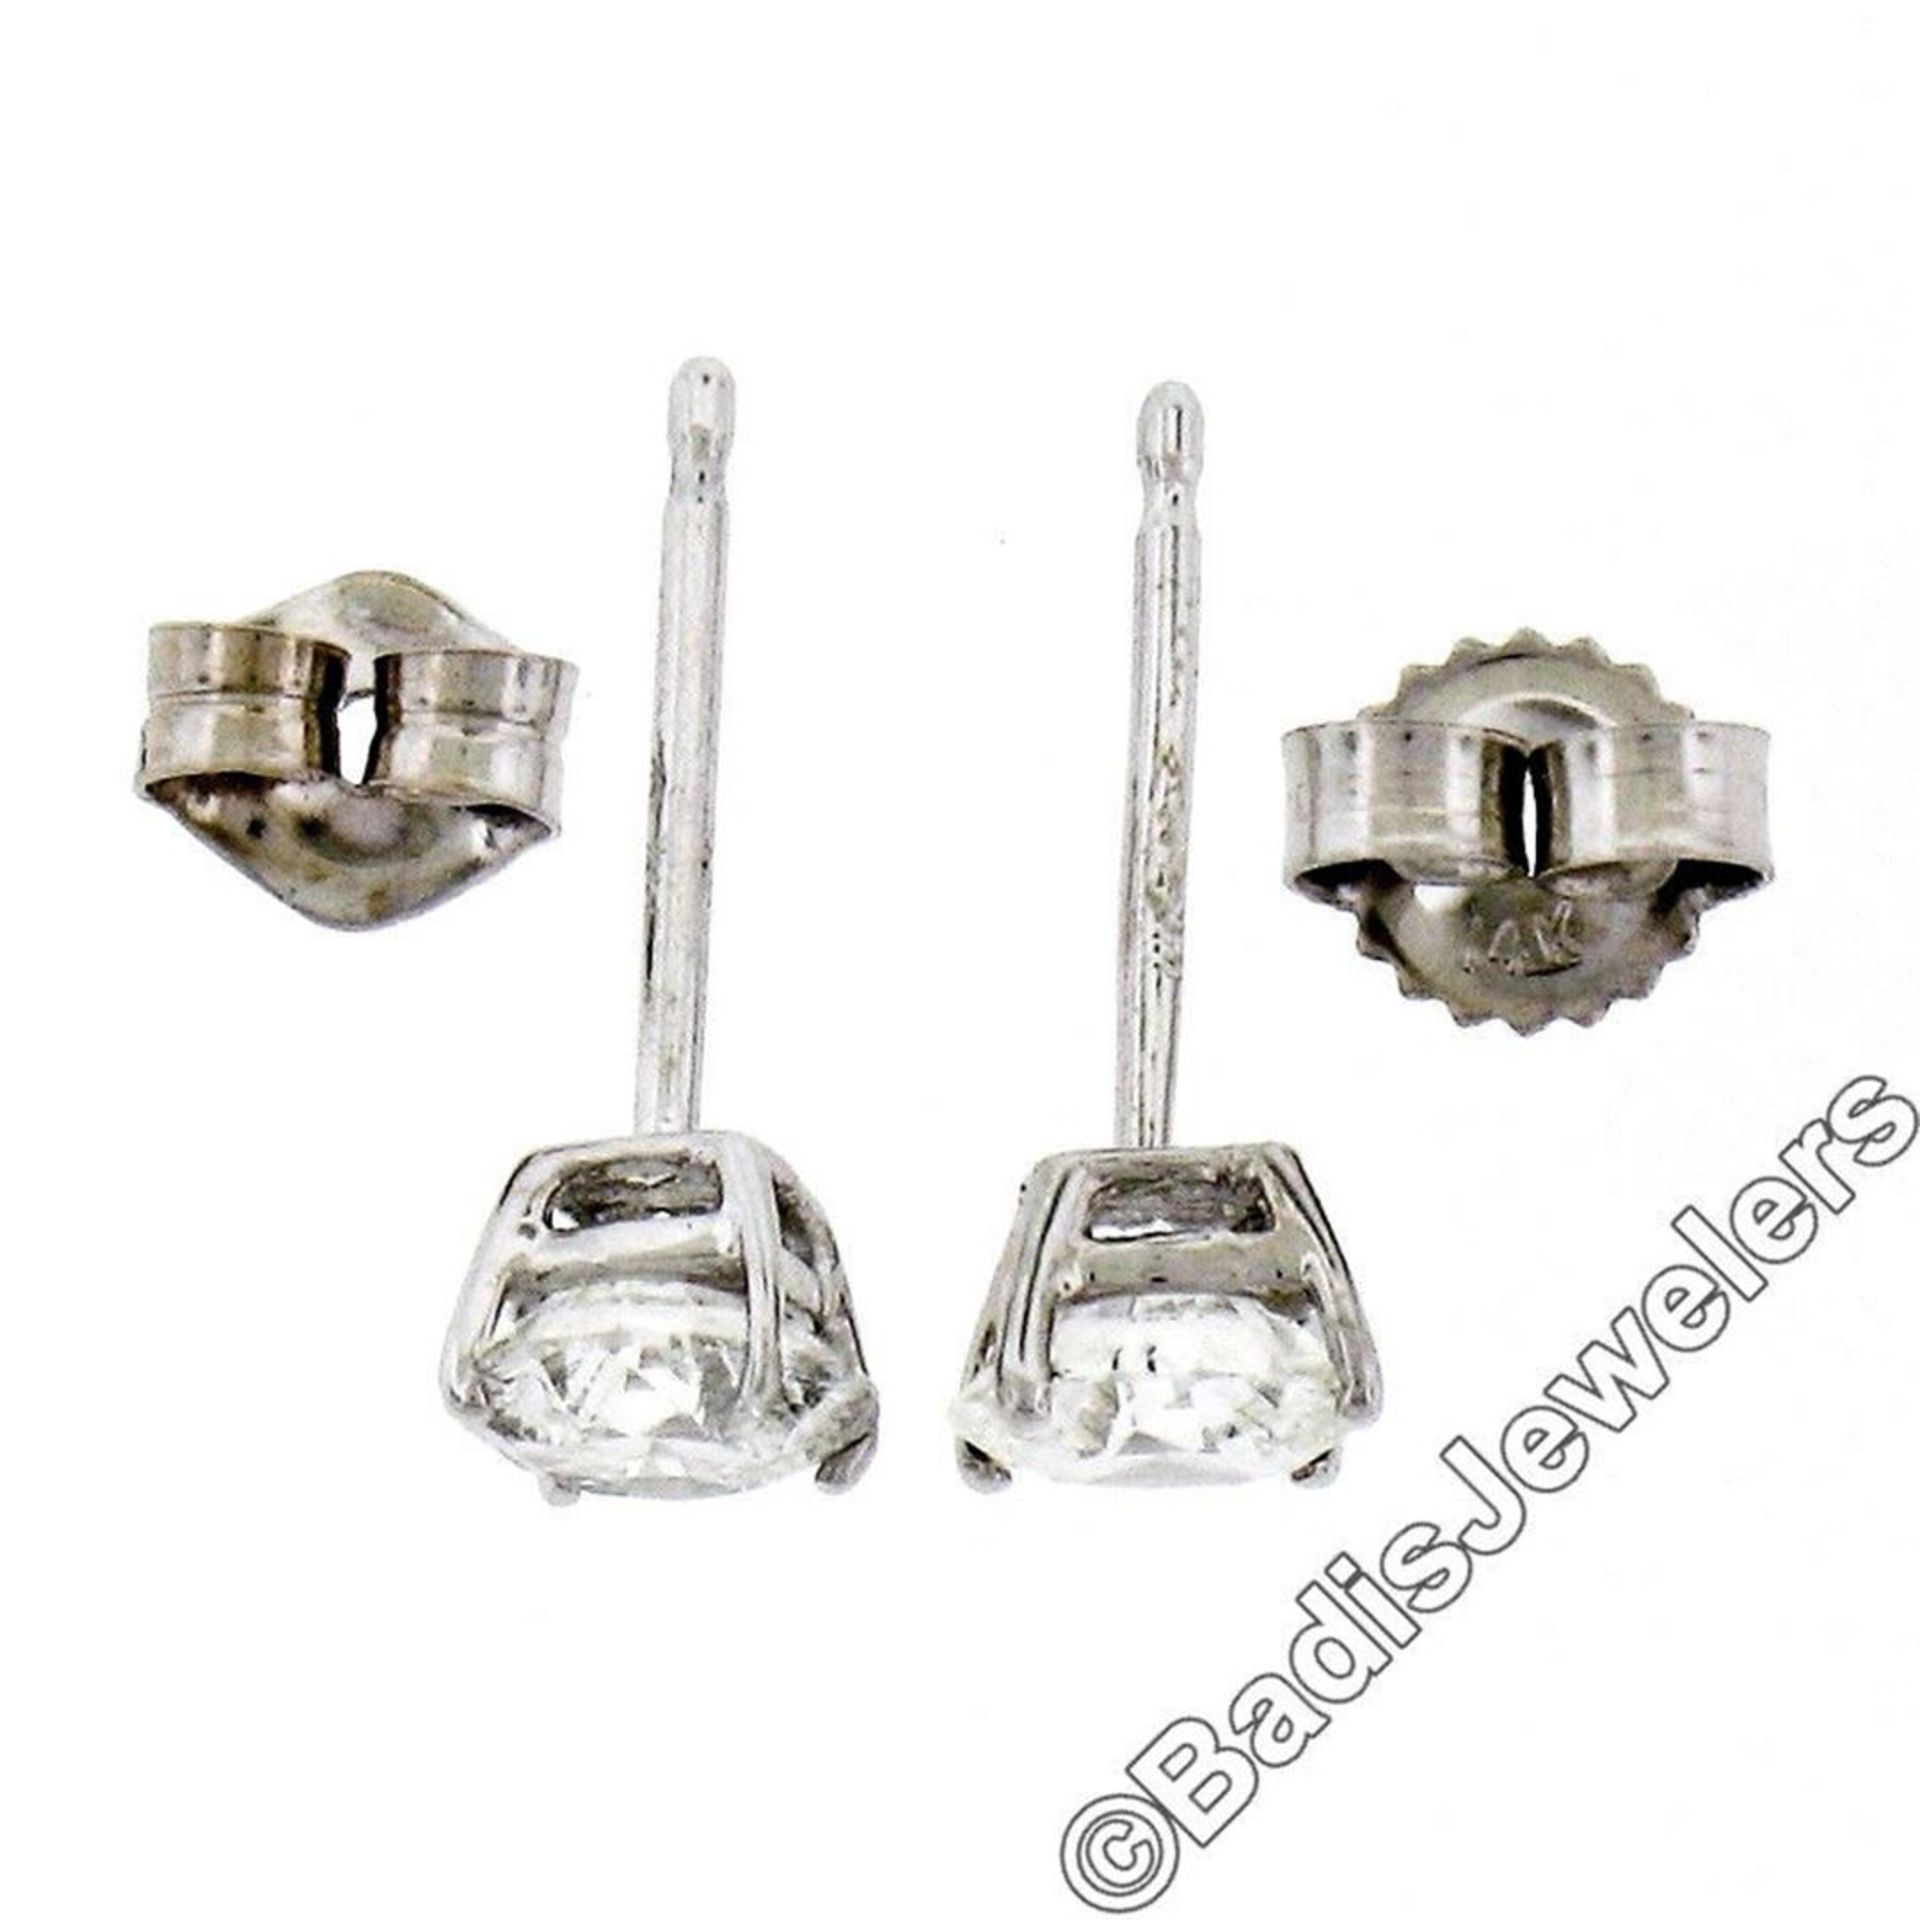 New Classic 14kt White Gold 0.75ctw Round Brilliant Diamond Stud Earrings - Image 5 of 6